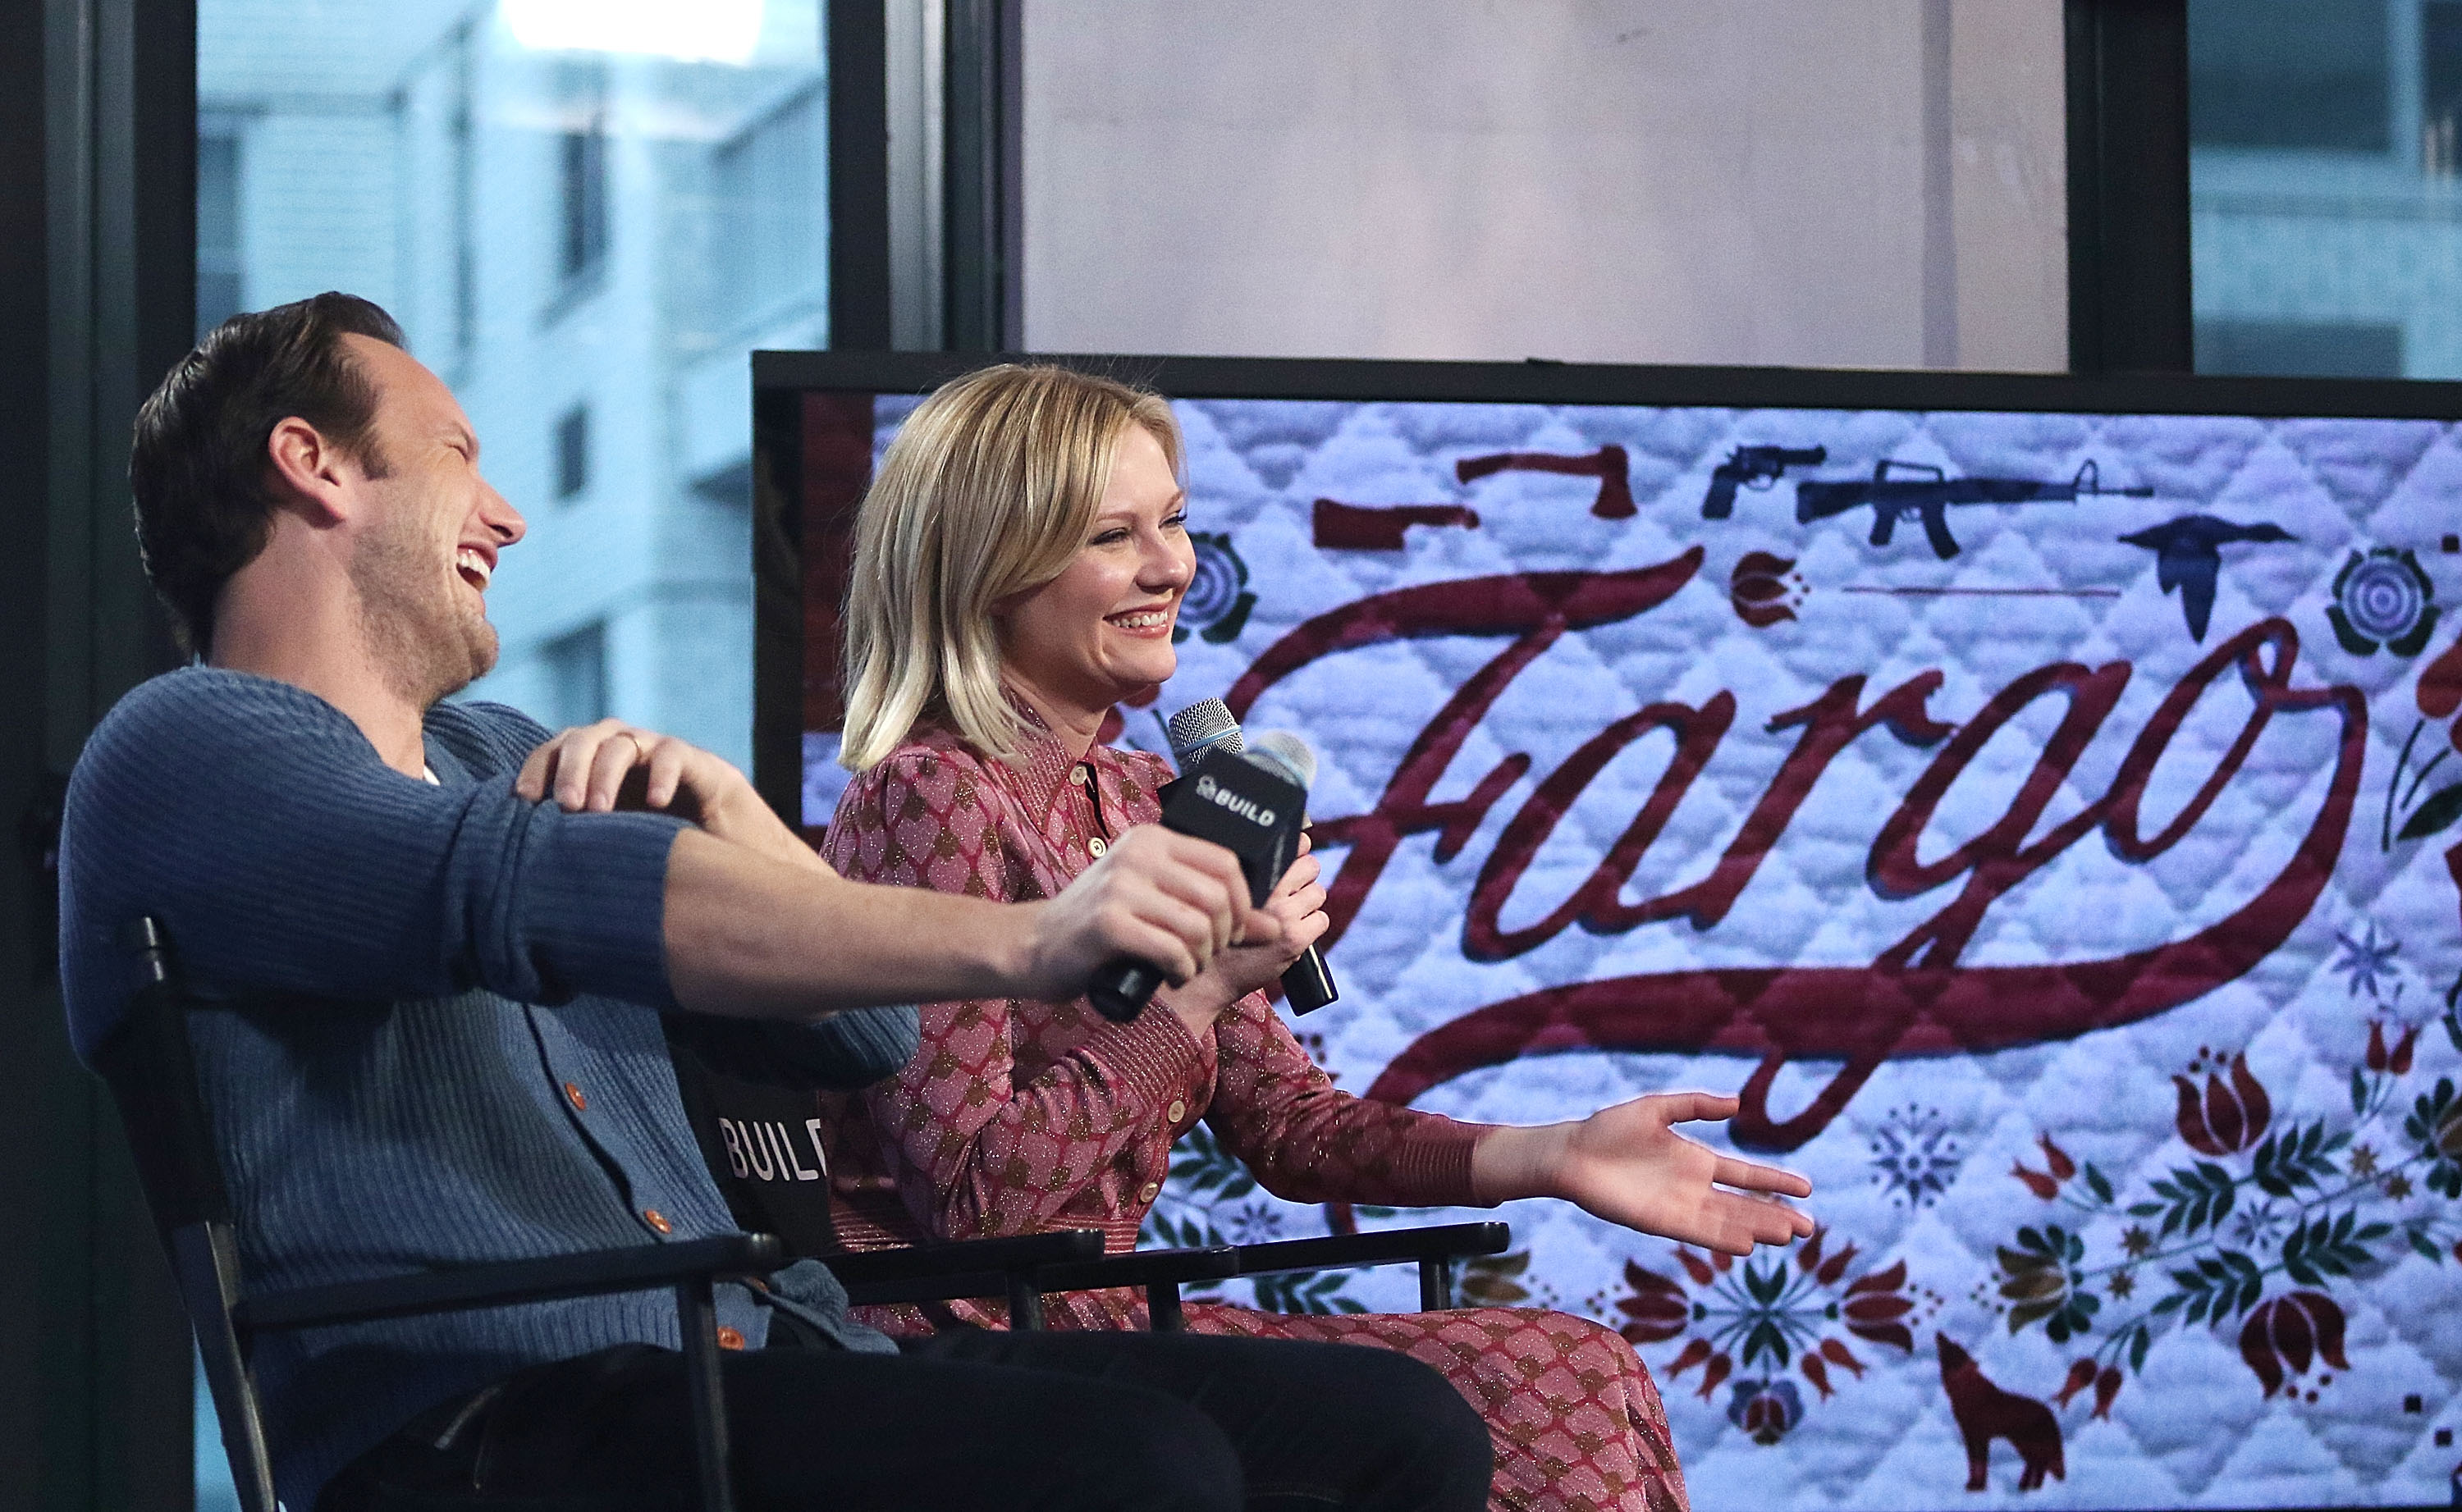 Kirsten Dunst and Patrick Wilson from 'Fargo' attend AOL BUILD Series on Dec. 11, 2015 in New York City. (Laura Cavanaugh—FilmMagic/Getty Images)